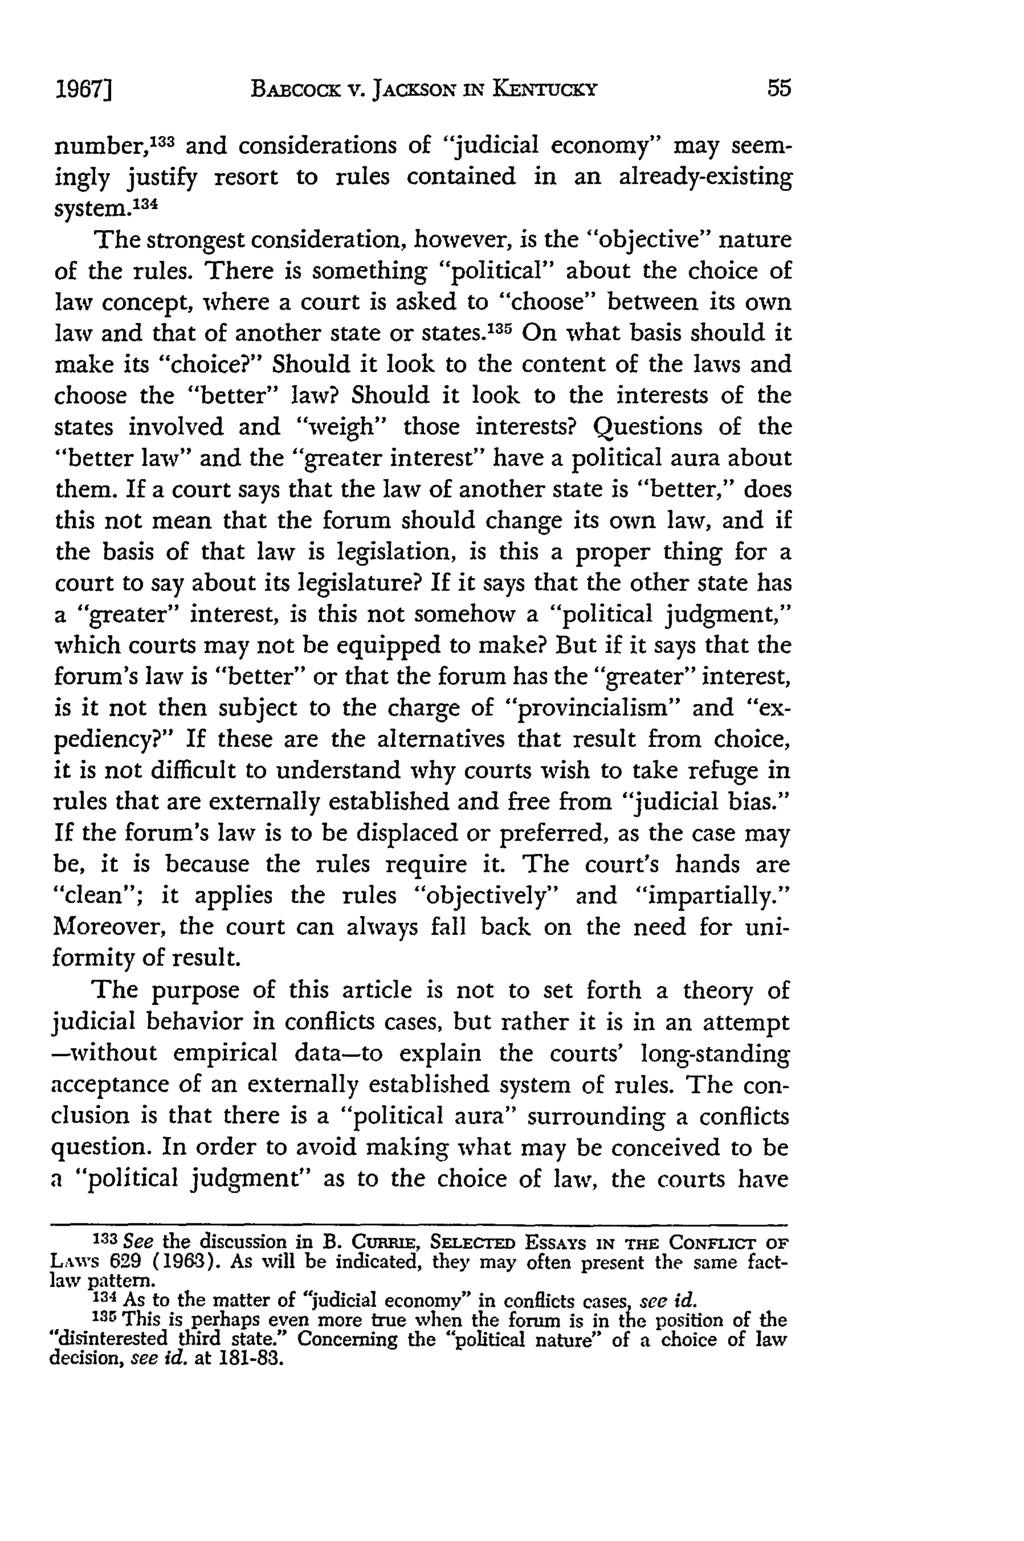 BABcocK v. JACKSON IN KEINUCKY number," 33 and considerations of "judicial economy" may seemingly justify resort to rules contained in an already-existing system.